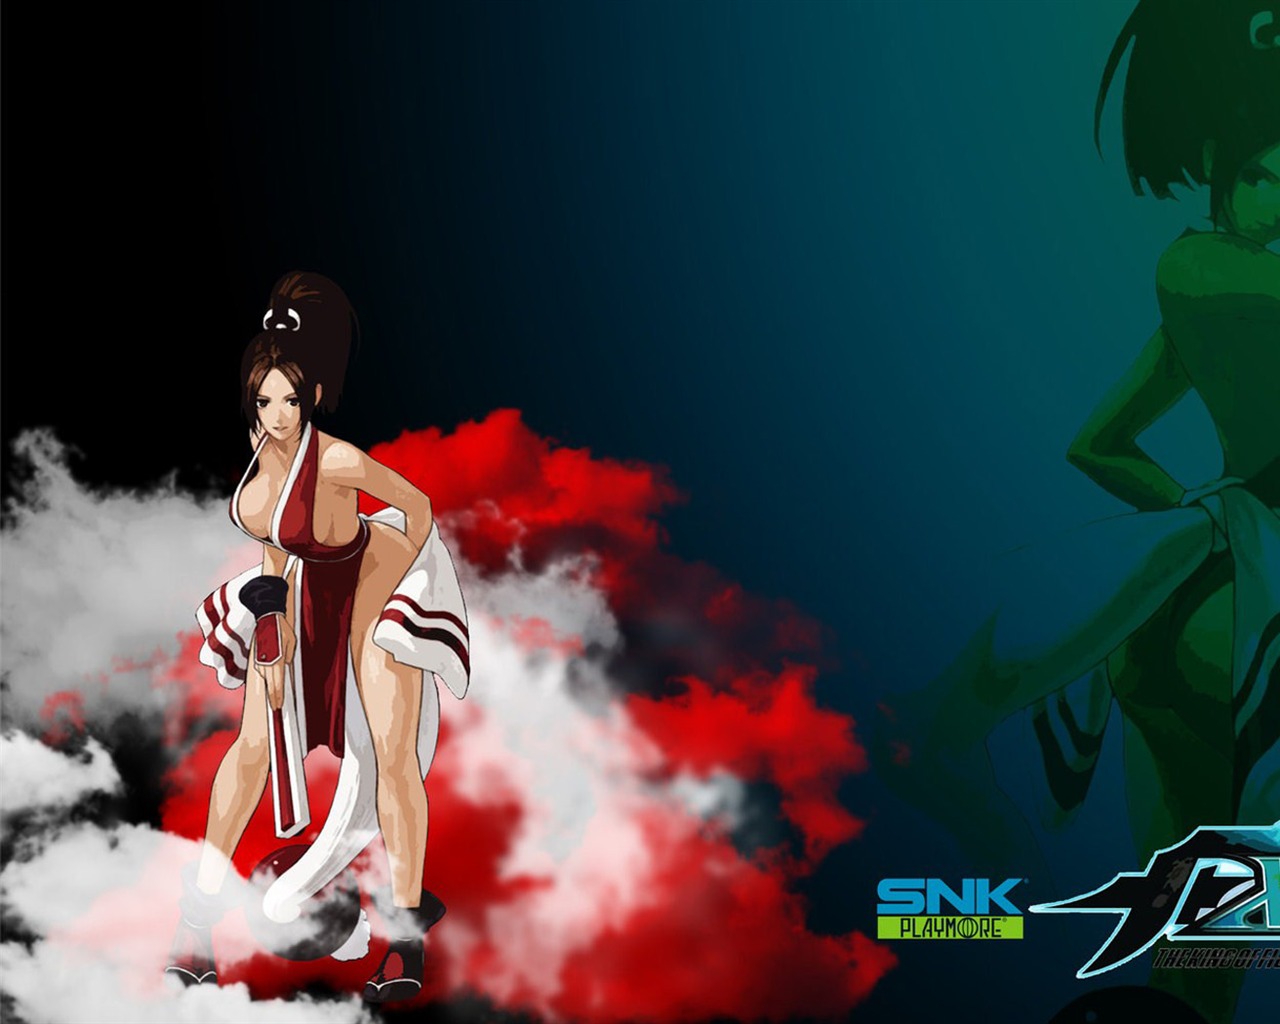 Le roi de wallpapers Fighters XIII #16 - 1280x1024